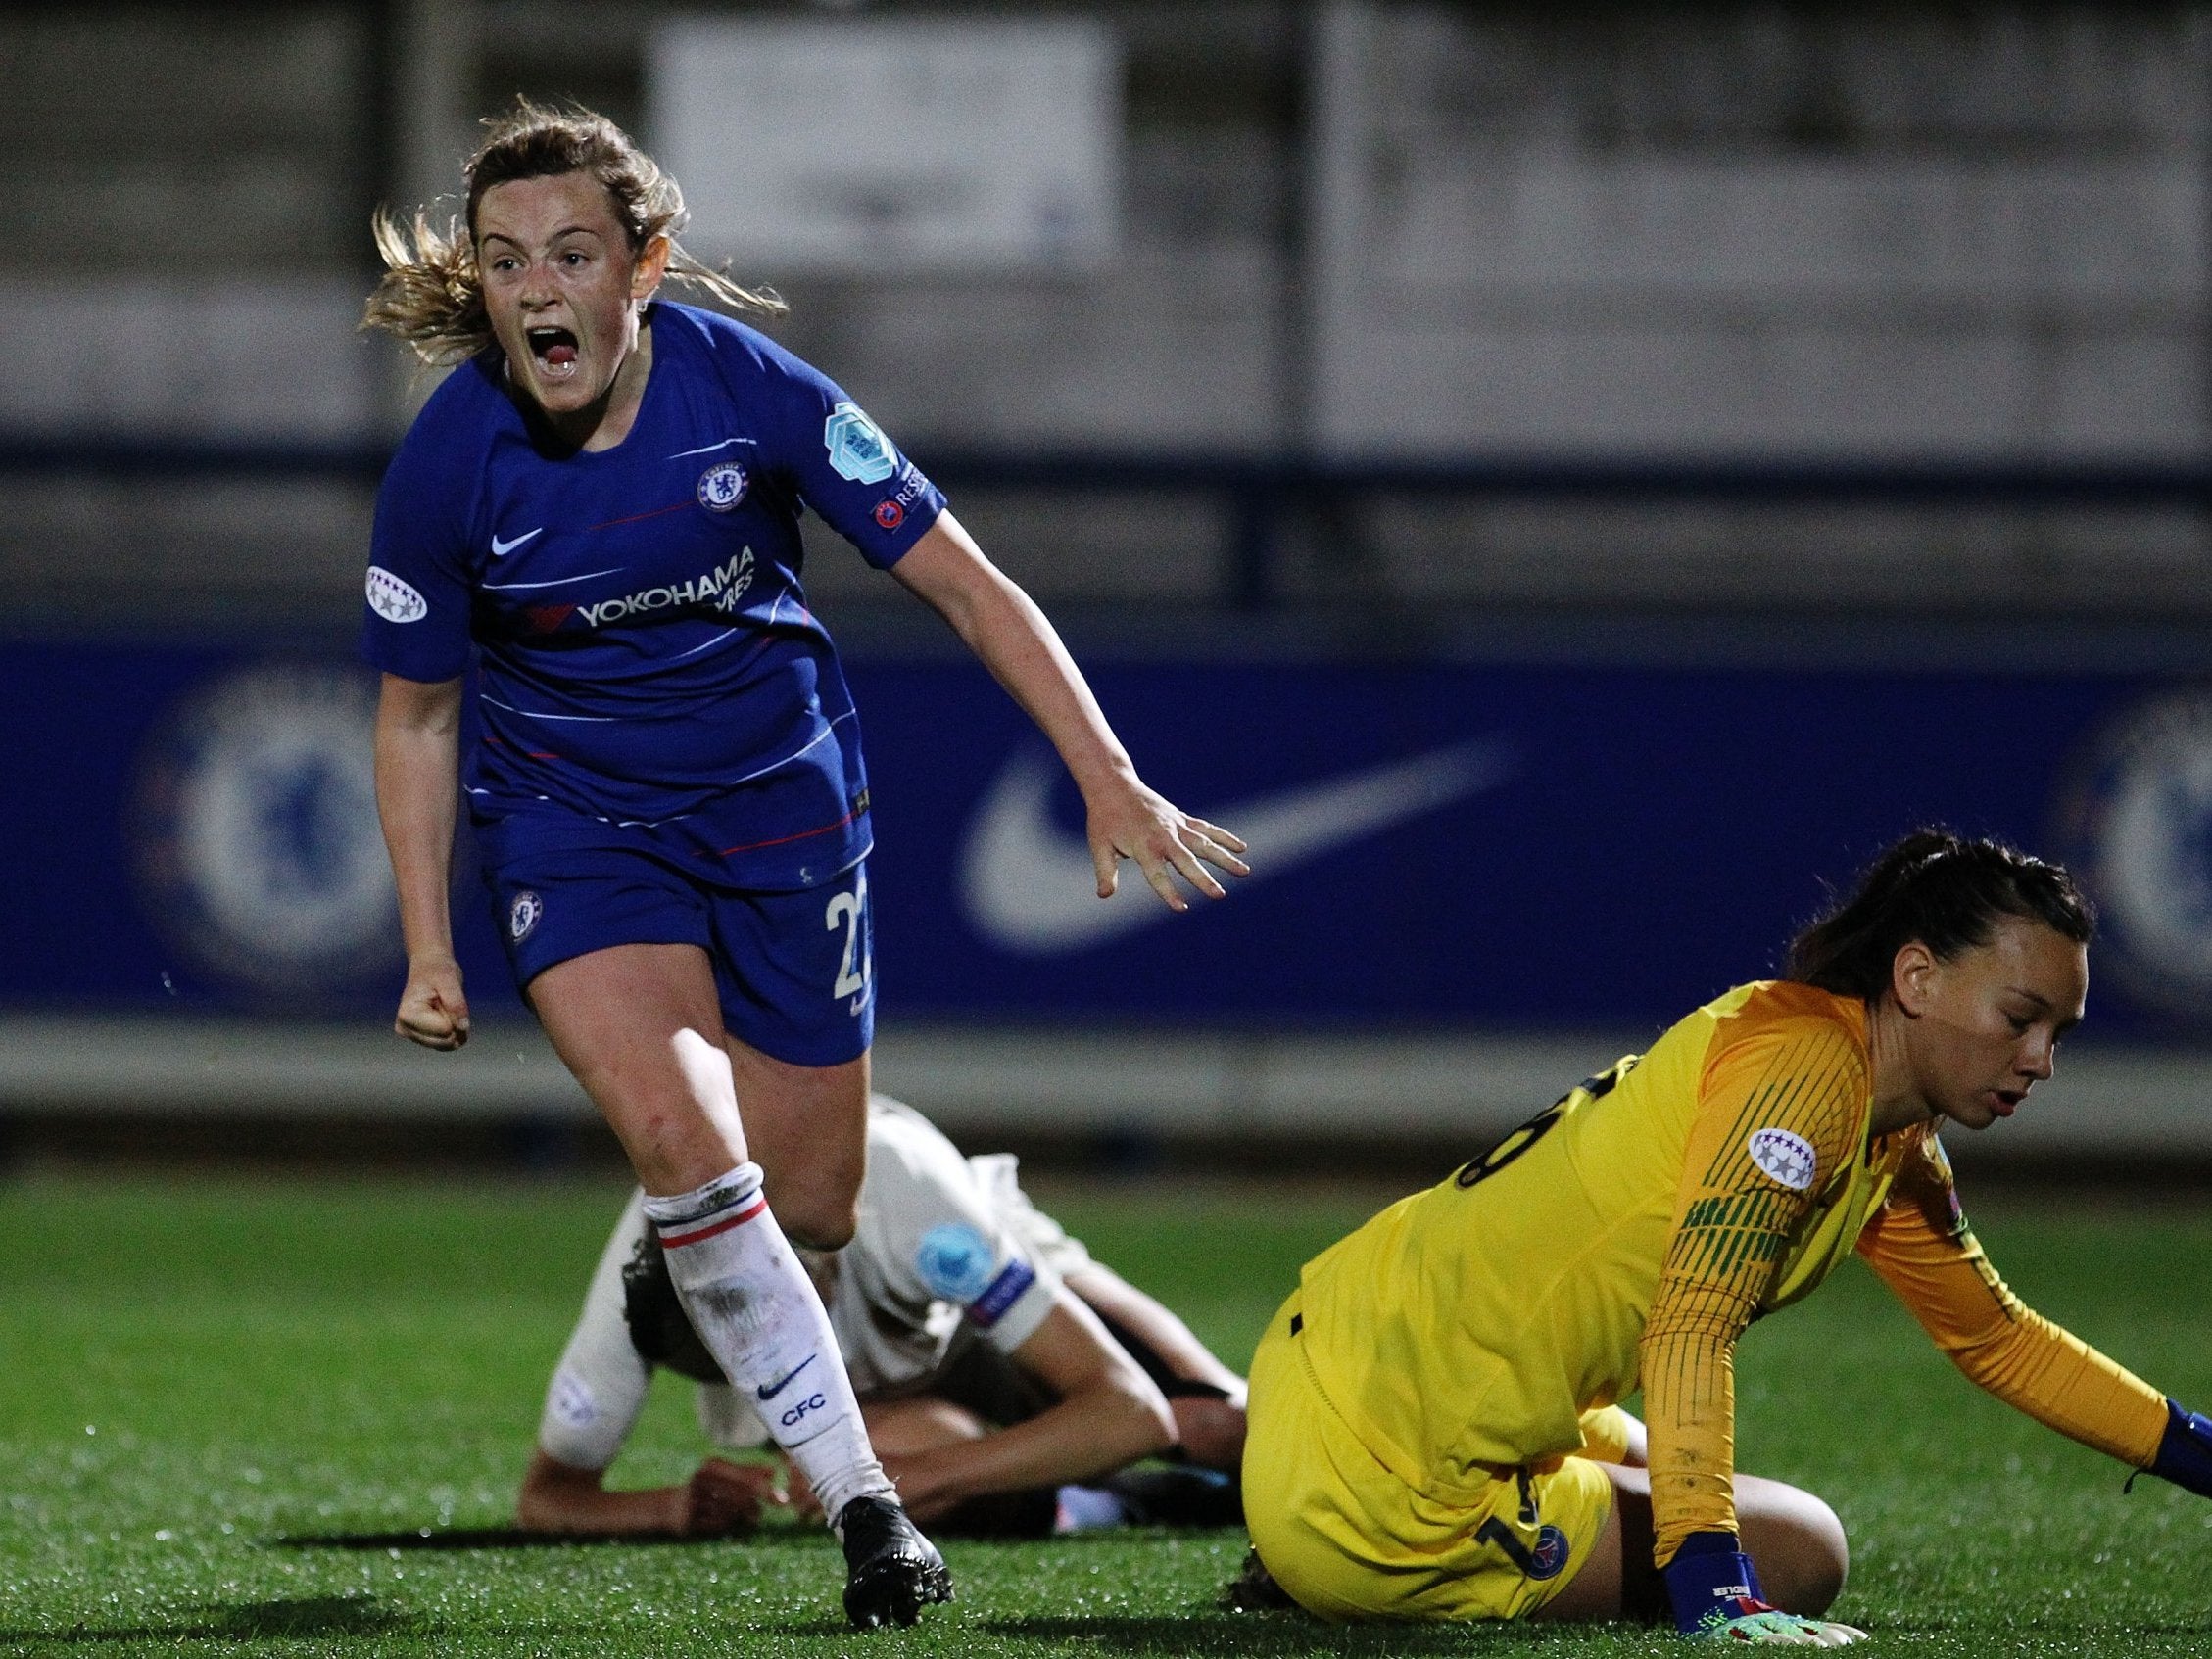 Image result for fran kirby chelsea 2-0 psg women's champions league 2019 getty